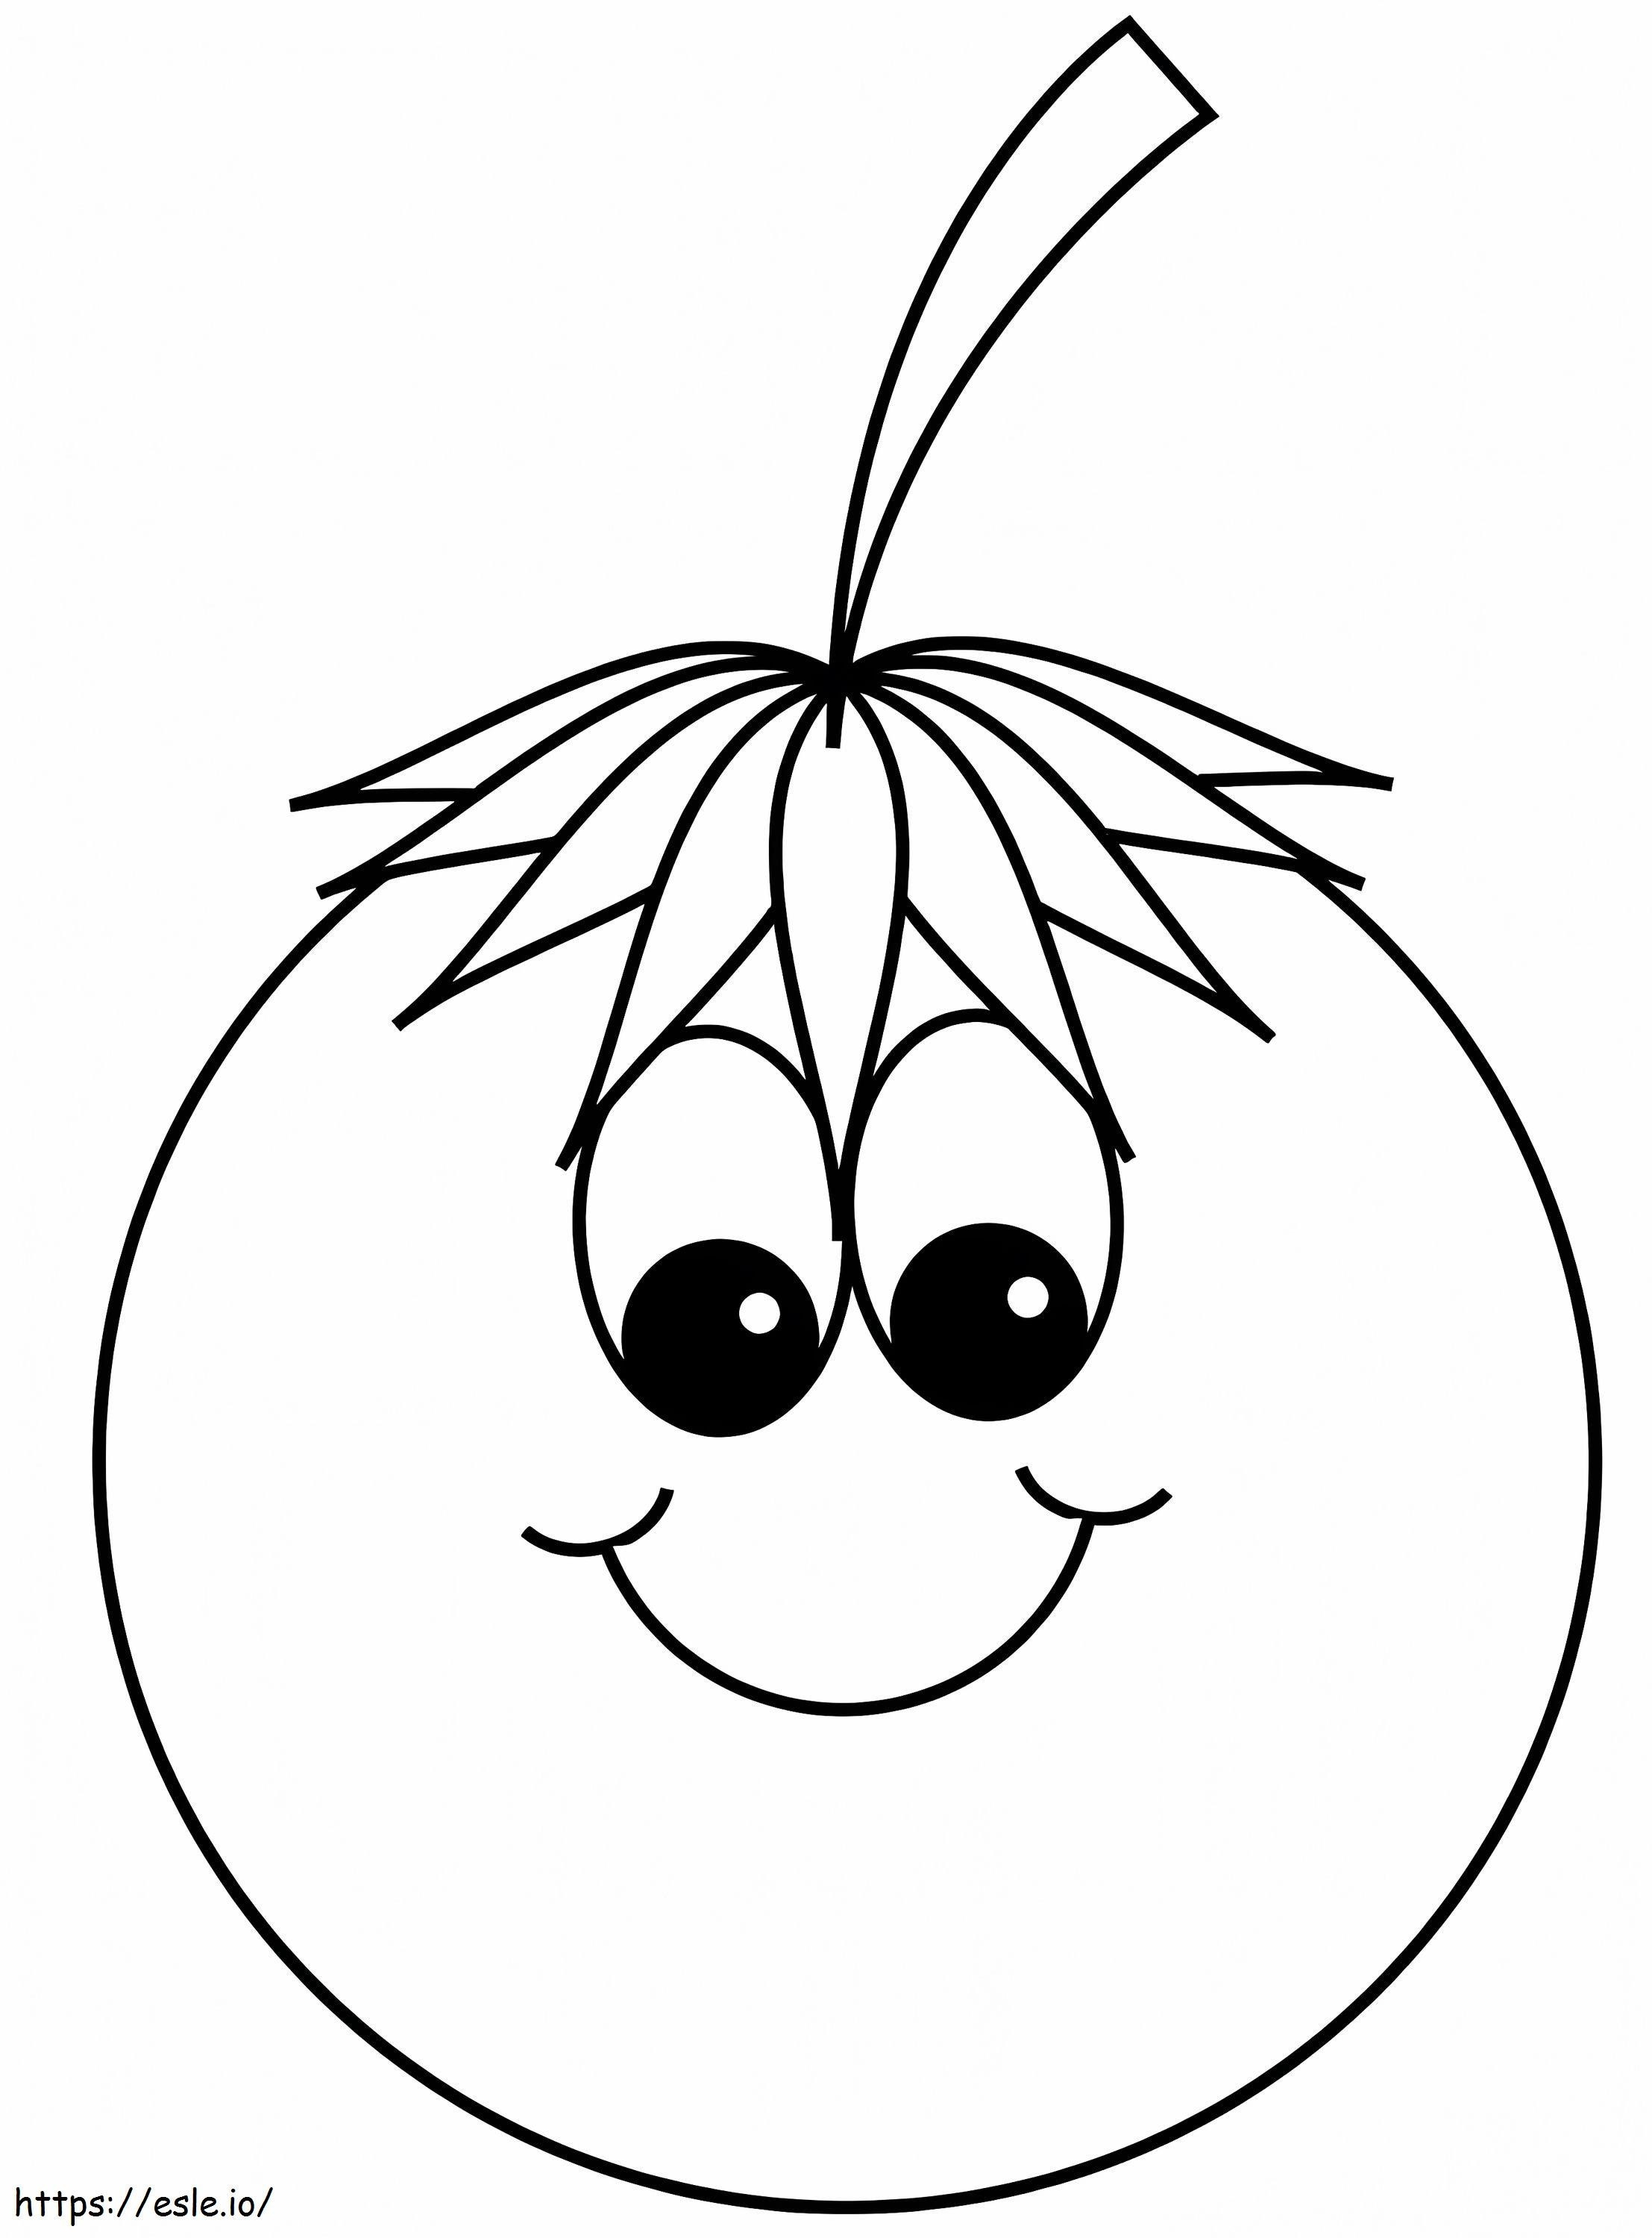 Cartoon Tomato Smiling coloring page